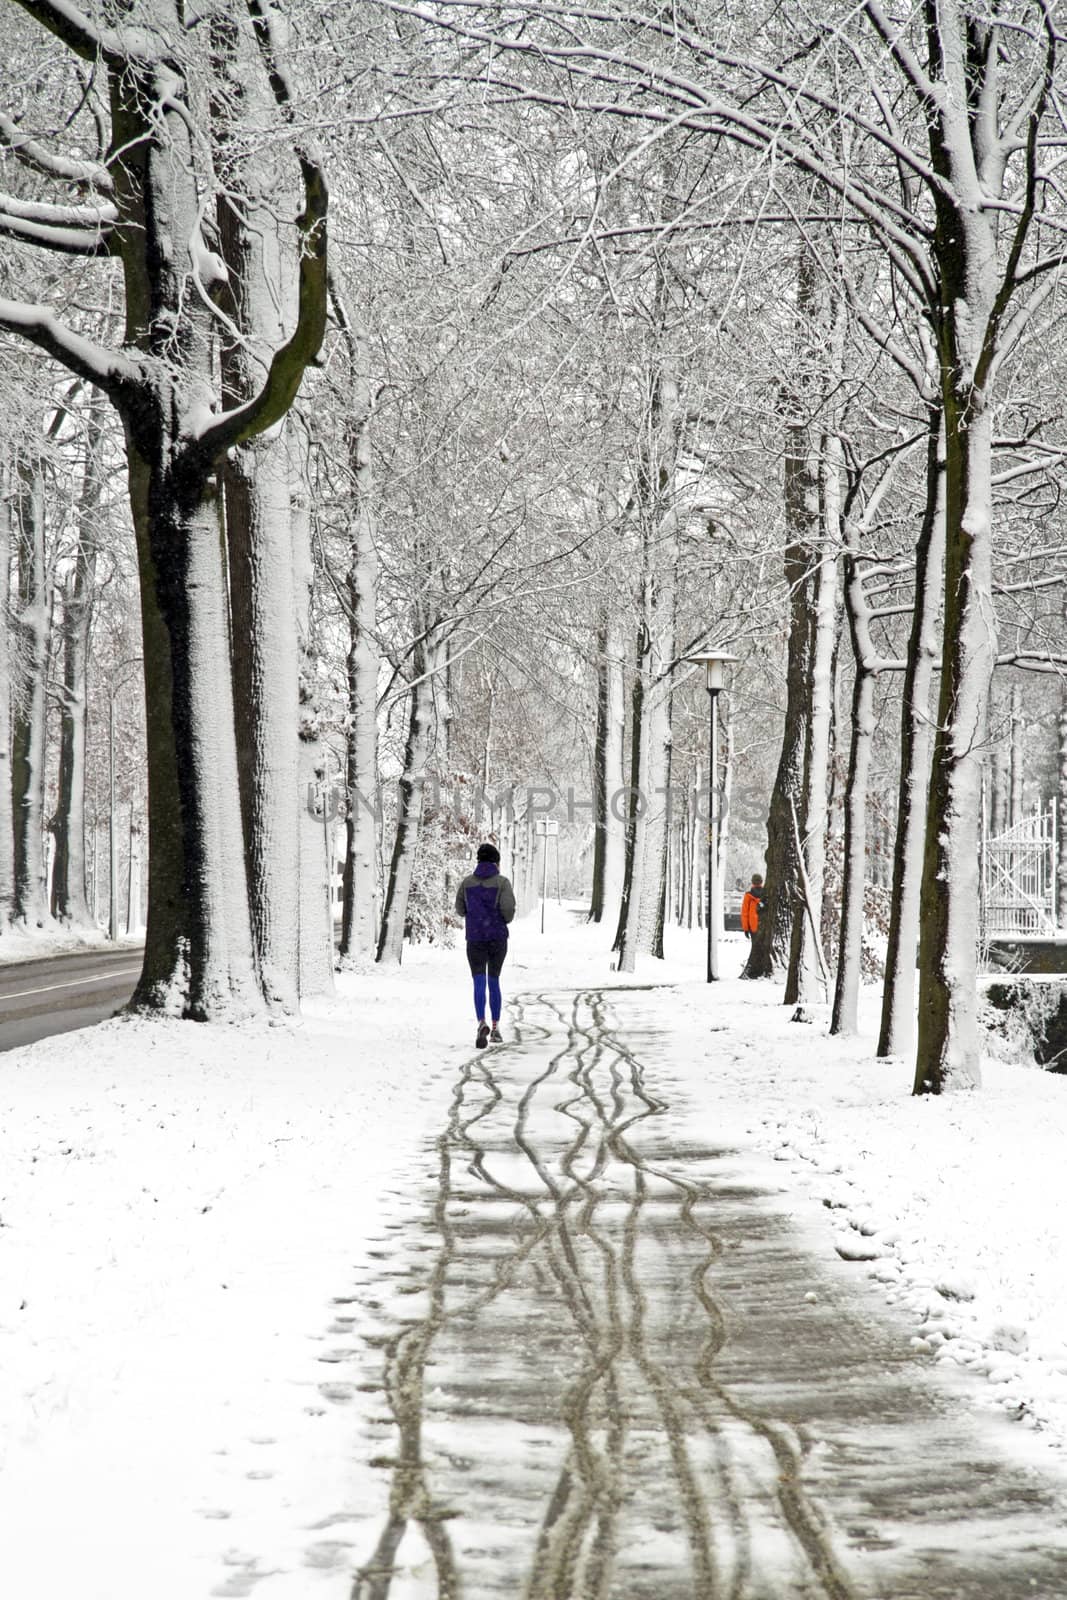 People jogging in winter in the forest from the Netherlands